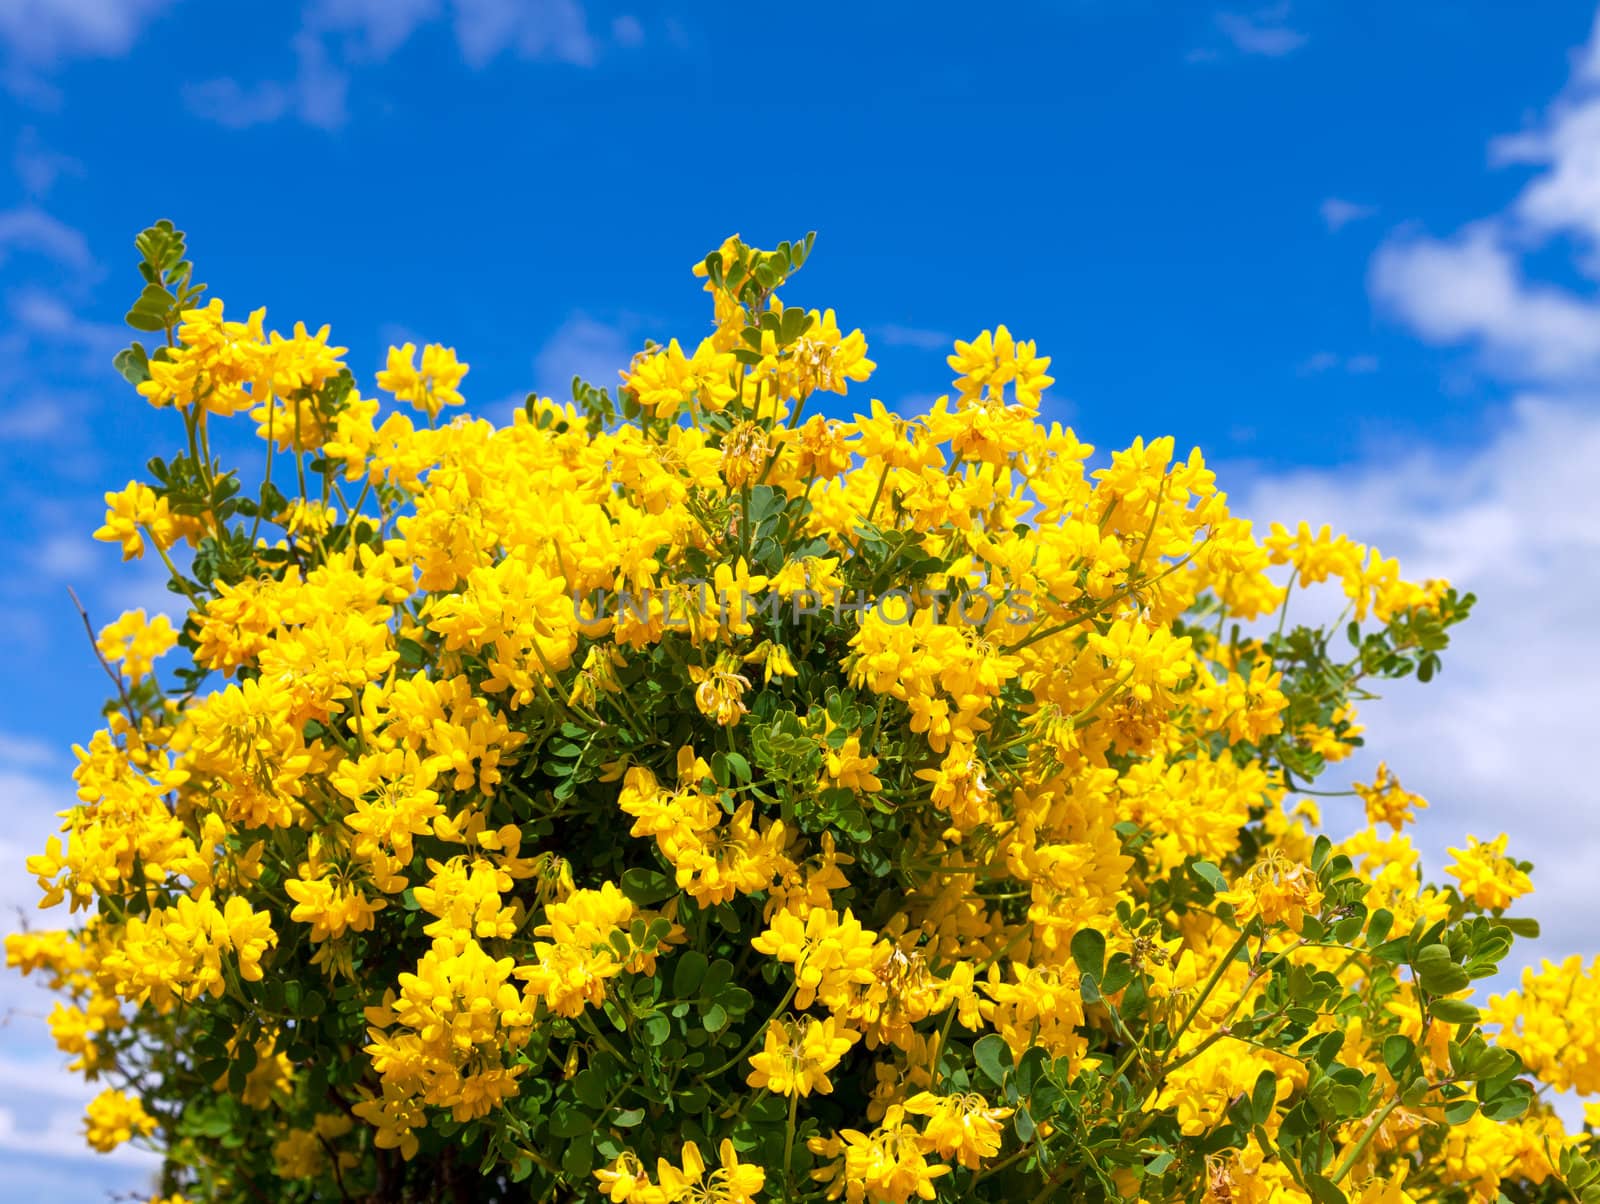 Bush of yellow flowers by Discovod